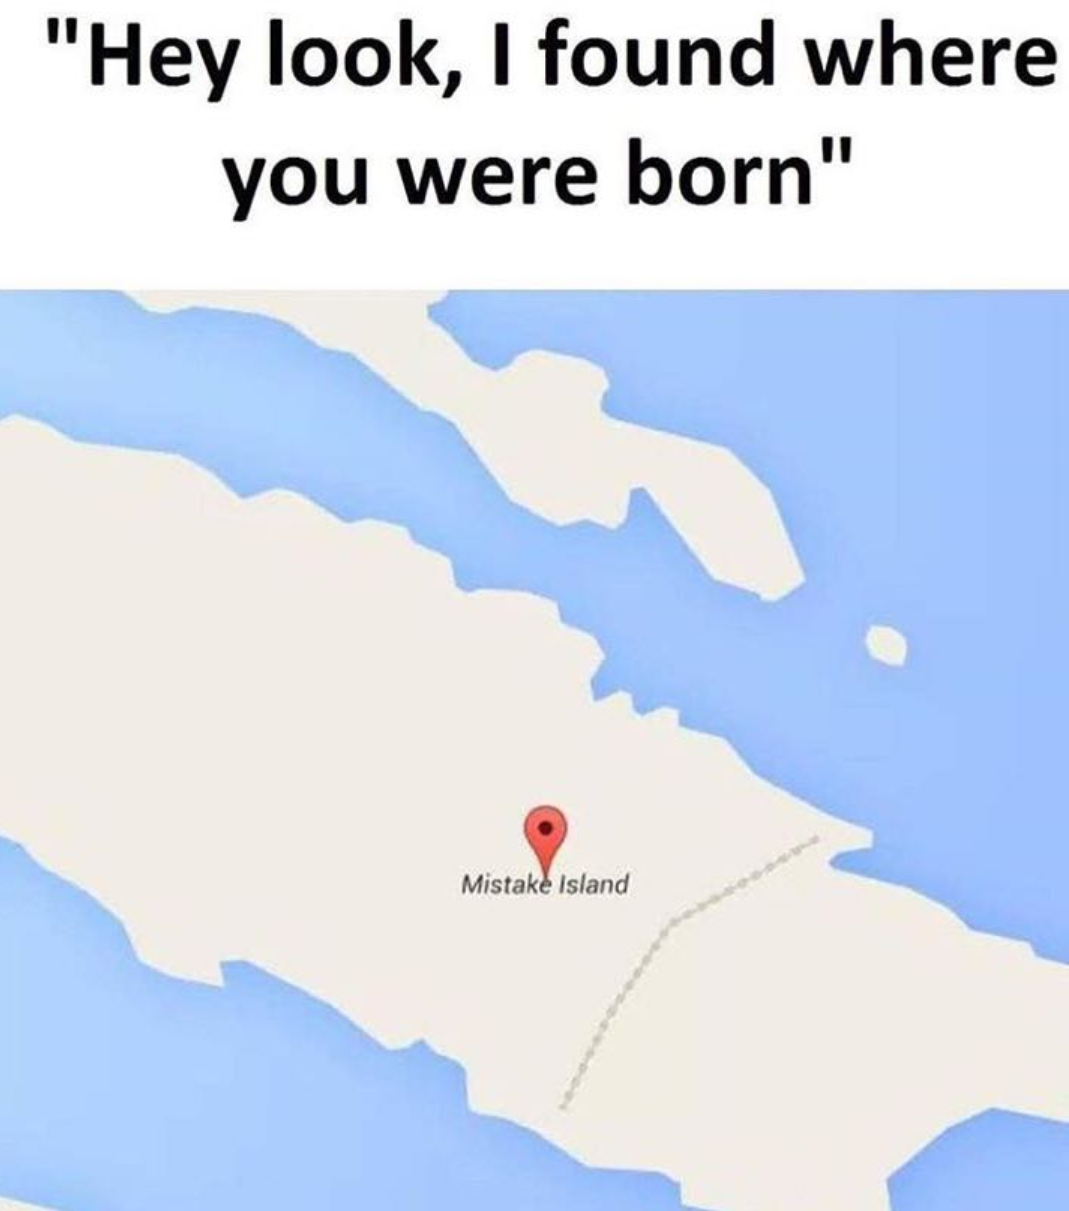 Hey look, I found where you were born